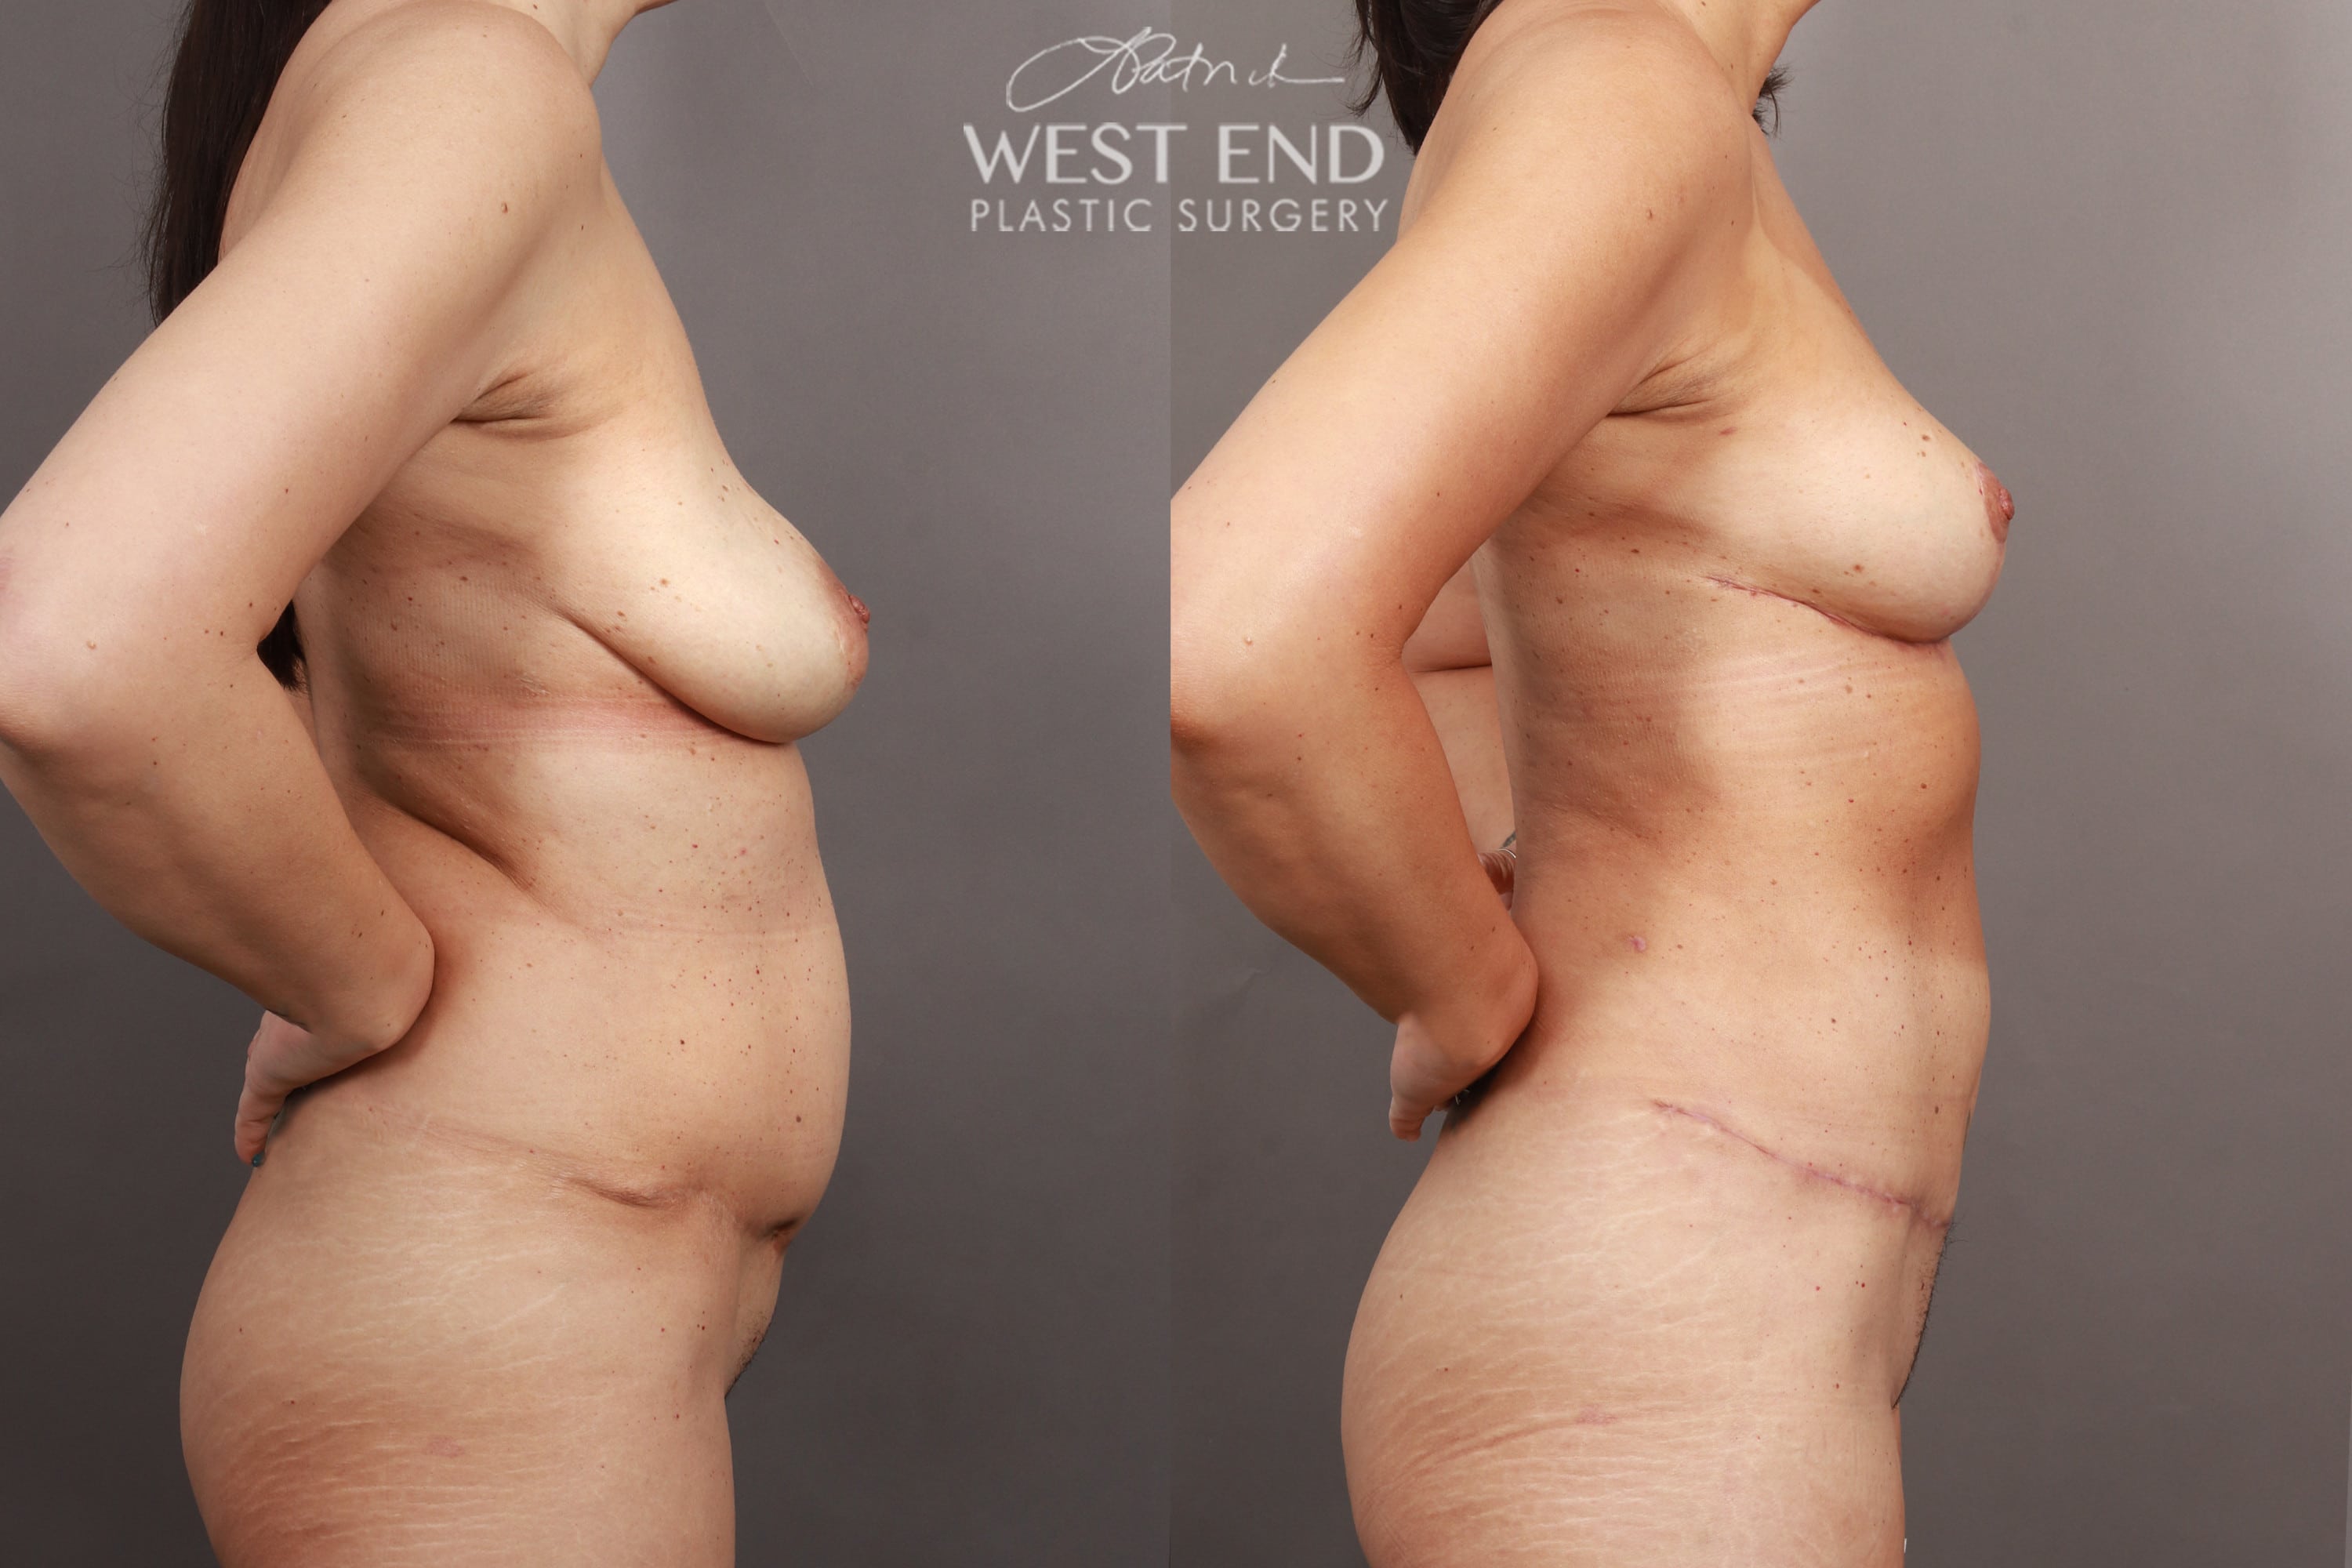 Breast Lift, Revision Tummy Tuck, and Liposuction (3 Months Post-op)